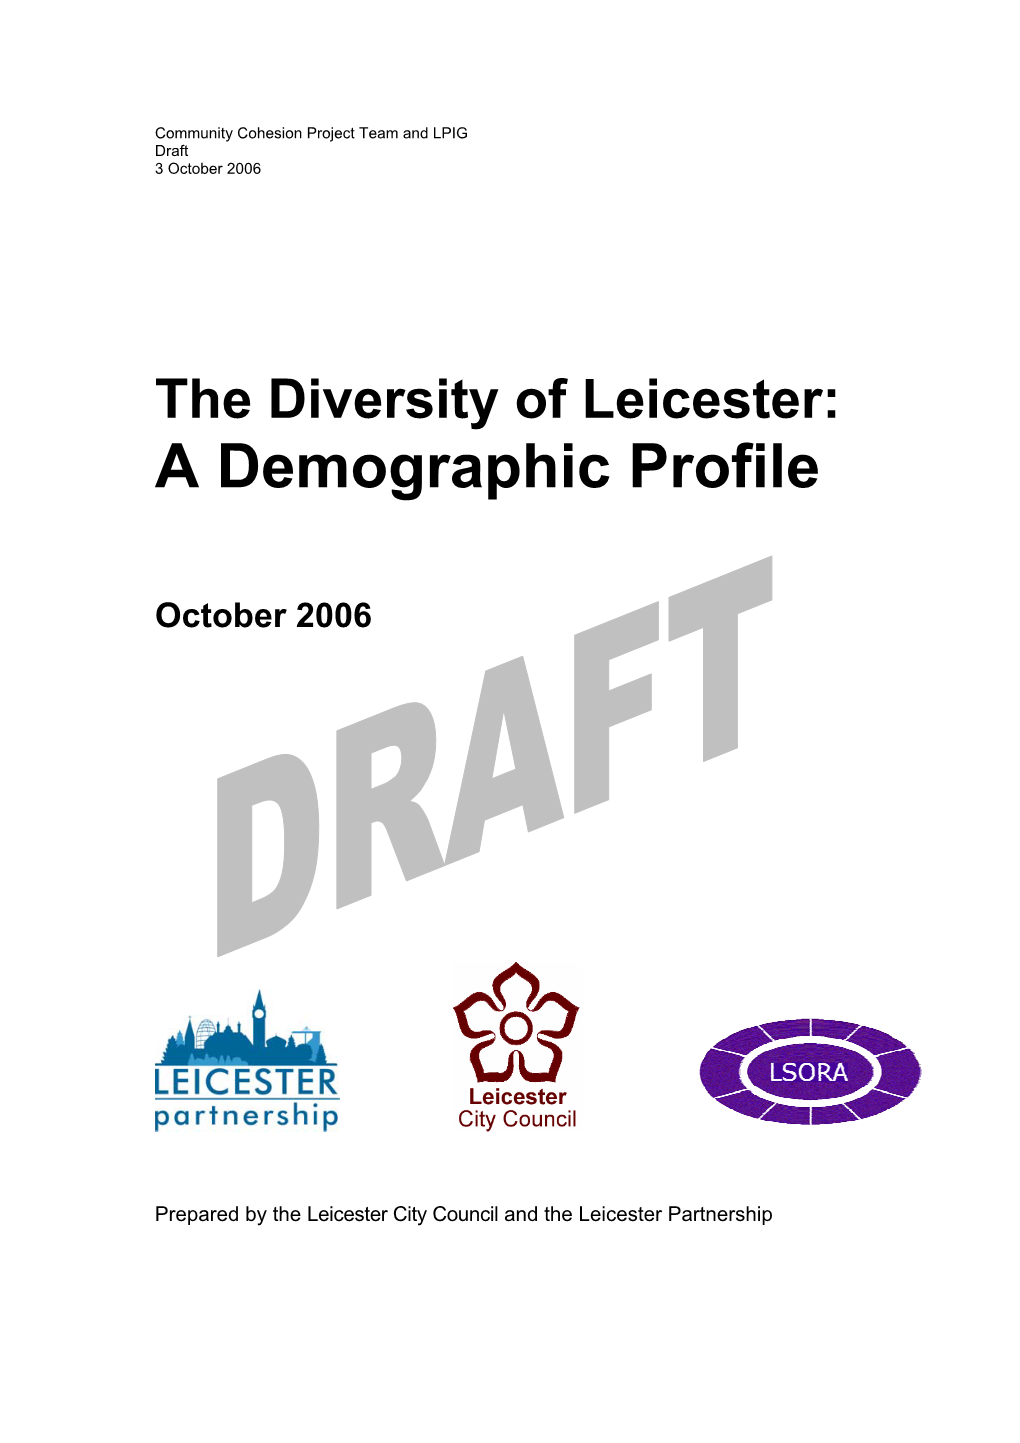 The Diversity of Leicester: a Demographic Profile